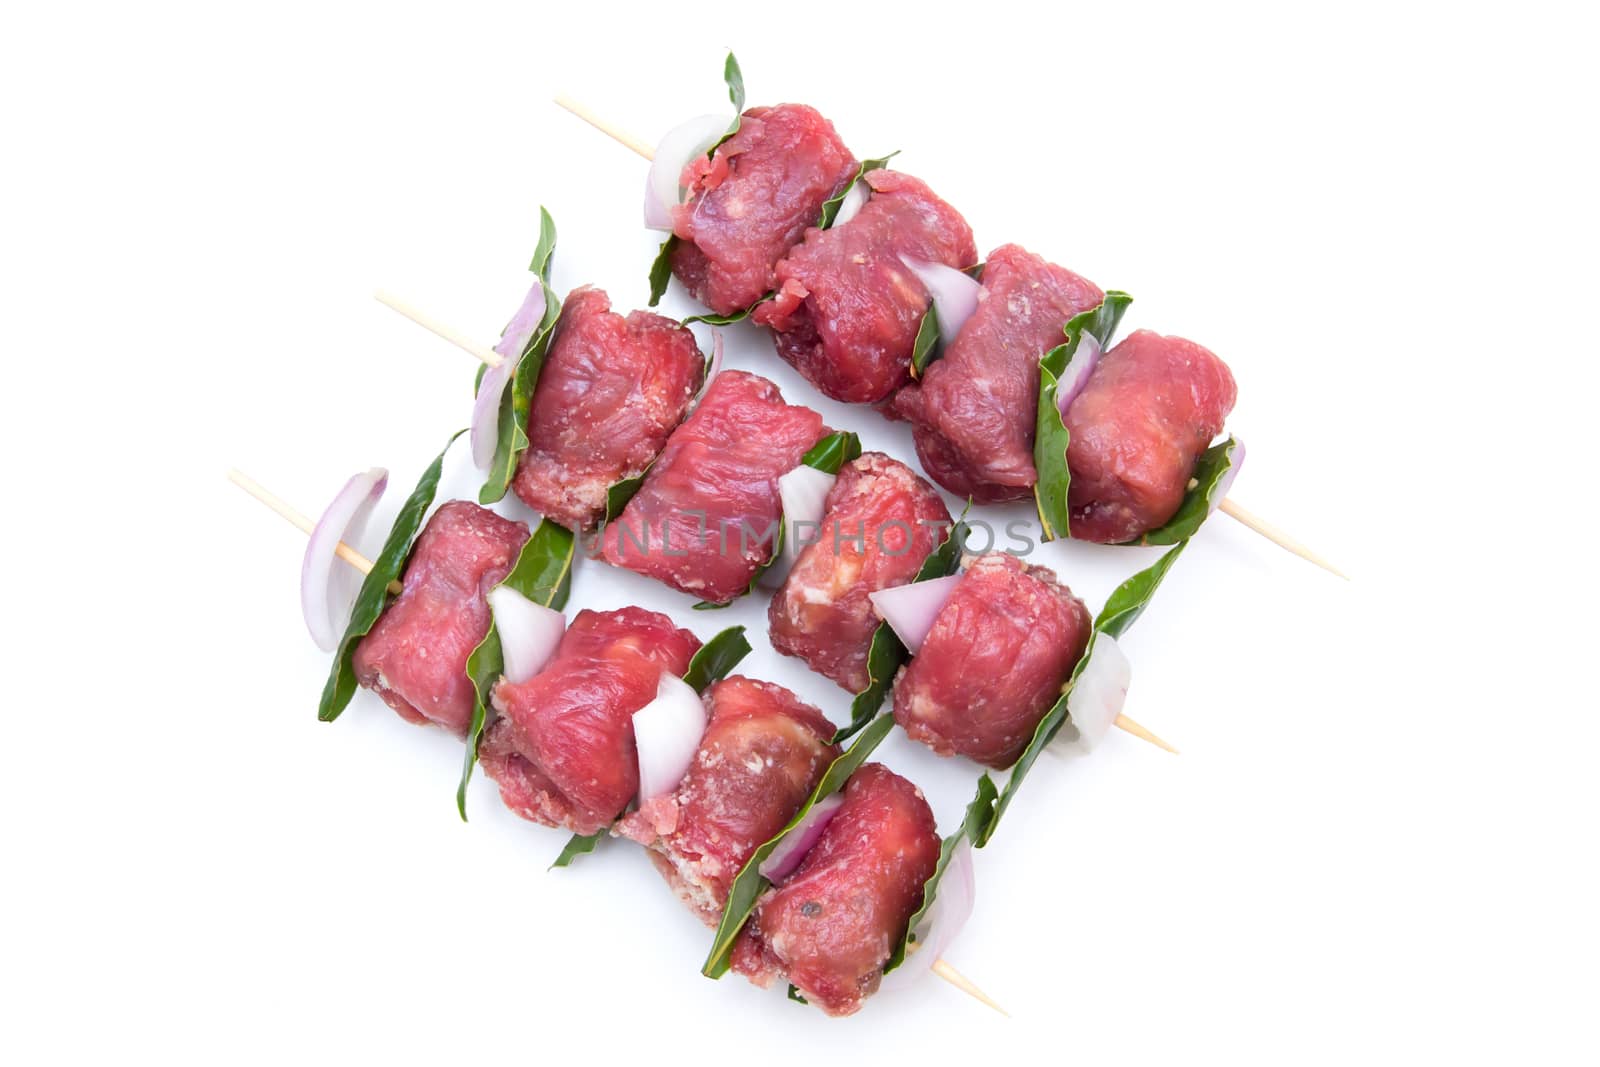 Skewers of meat from above on white background